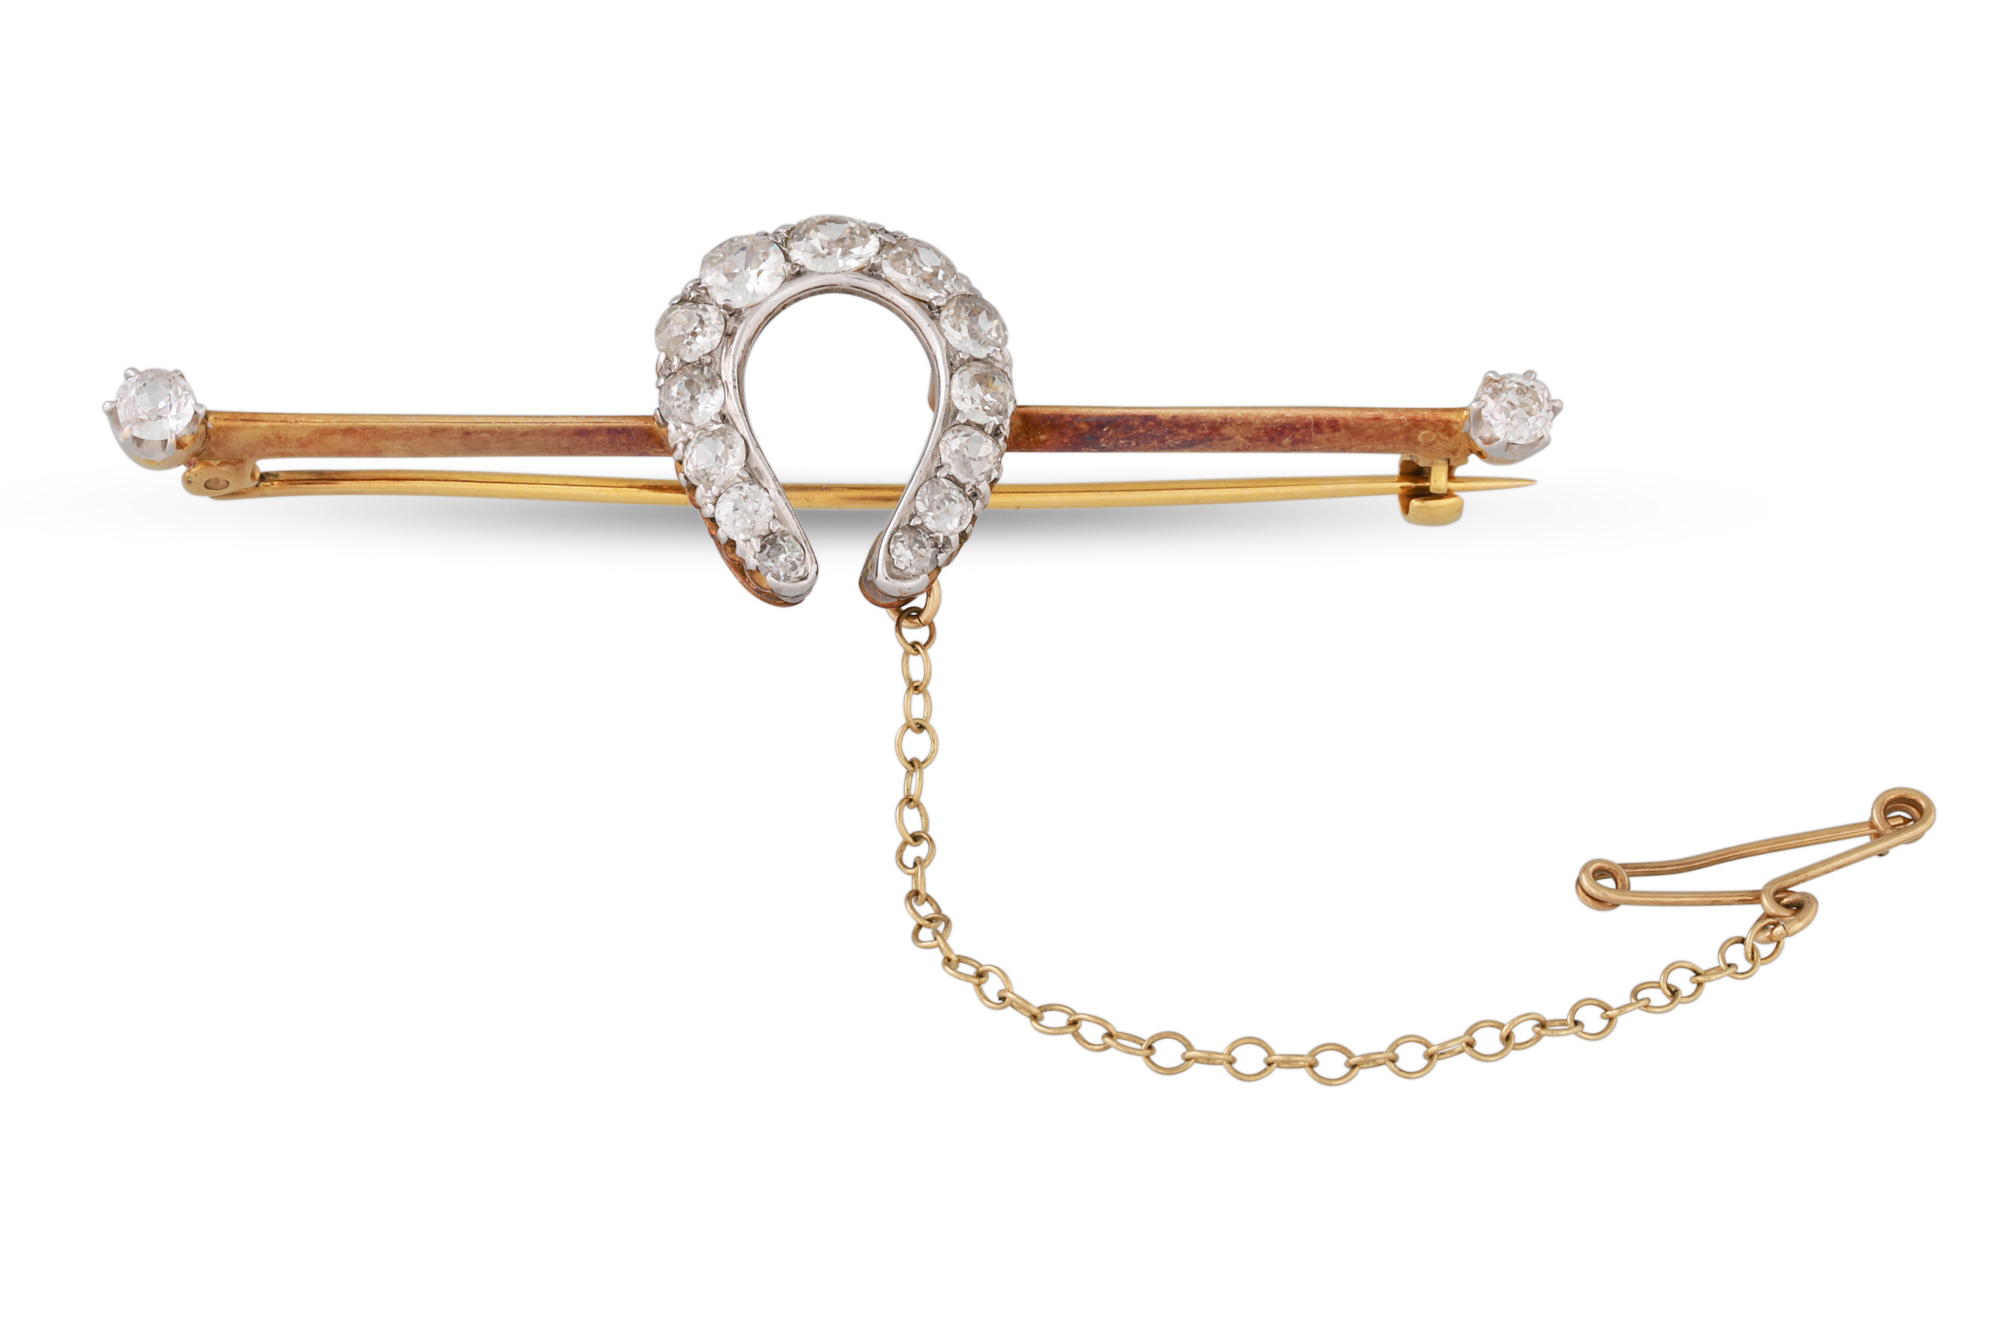 A VICTORIAN DIAMOND SET BROOCH, set with old cut diamonds in horseshoe motif, to a gold knife-edge